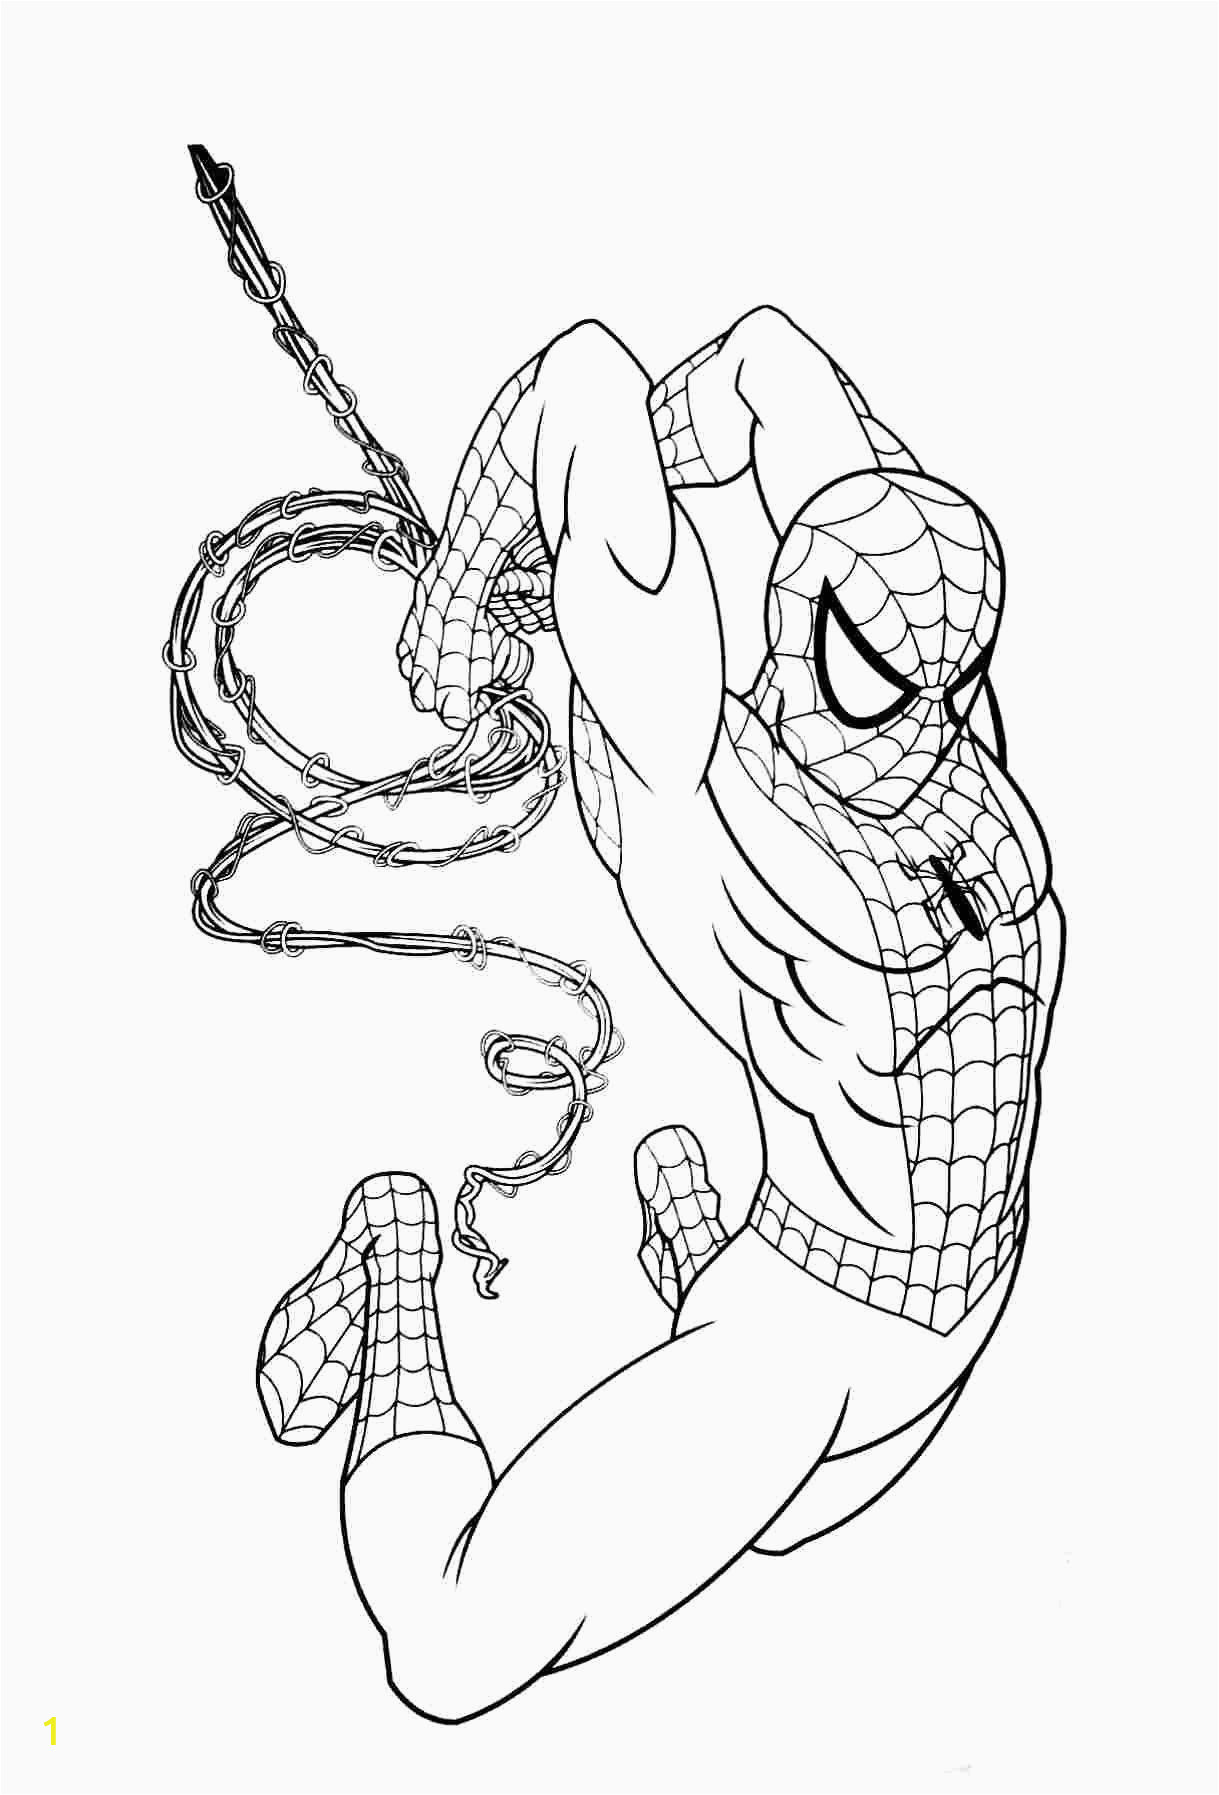 avengers infinity war spiderman coloring pages